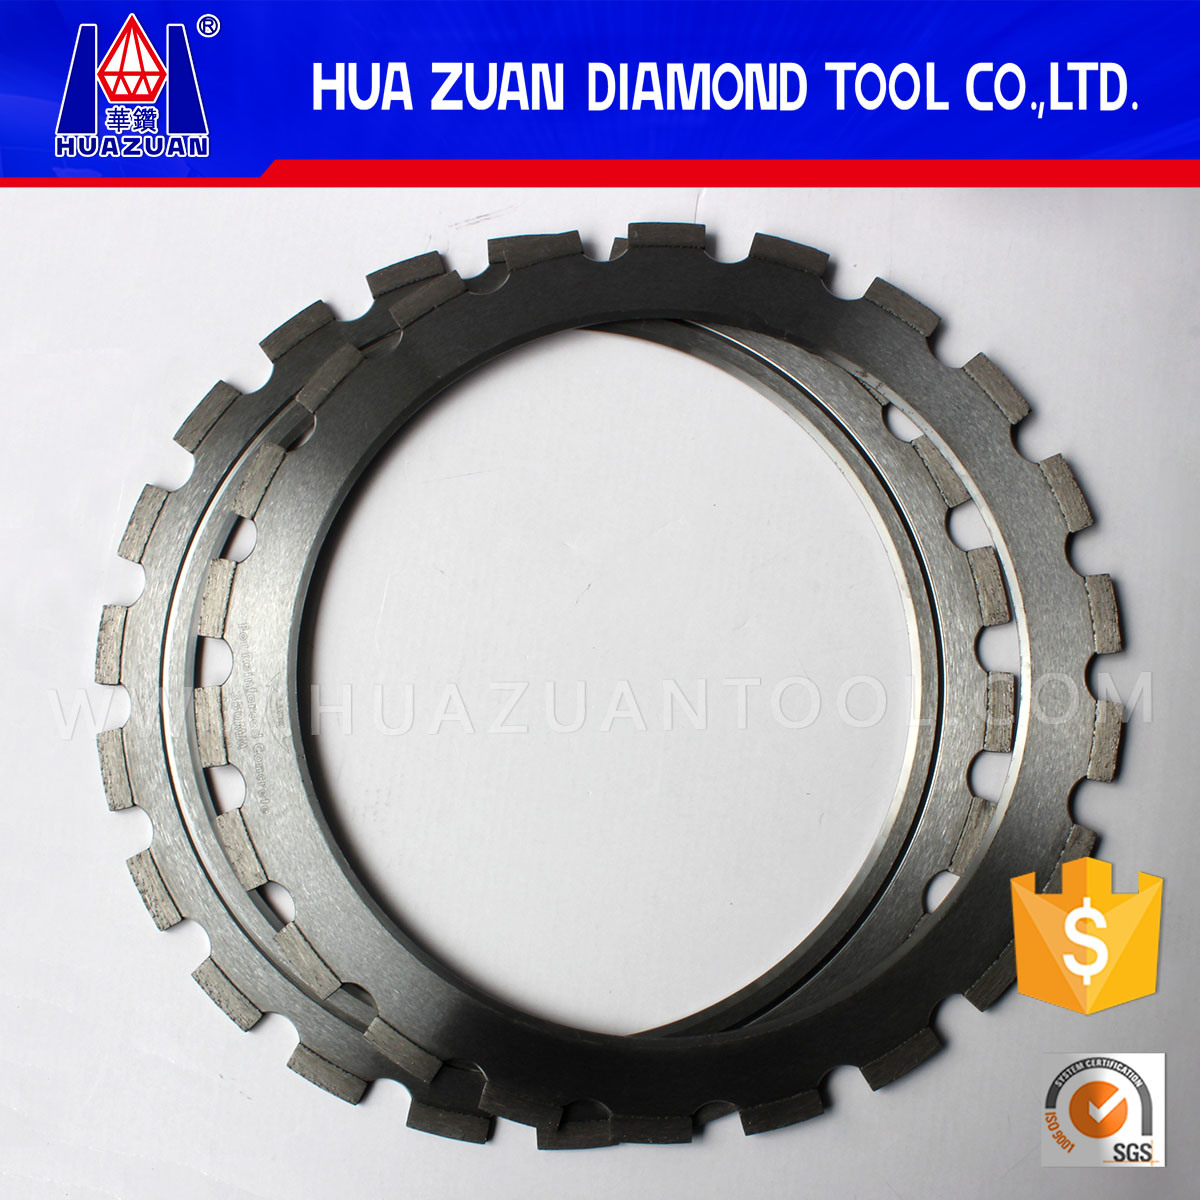 Diamond Ring Saw Blade for Cast Iron